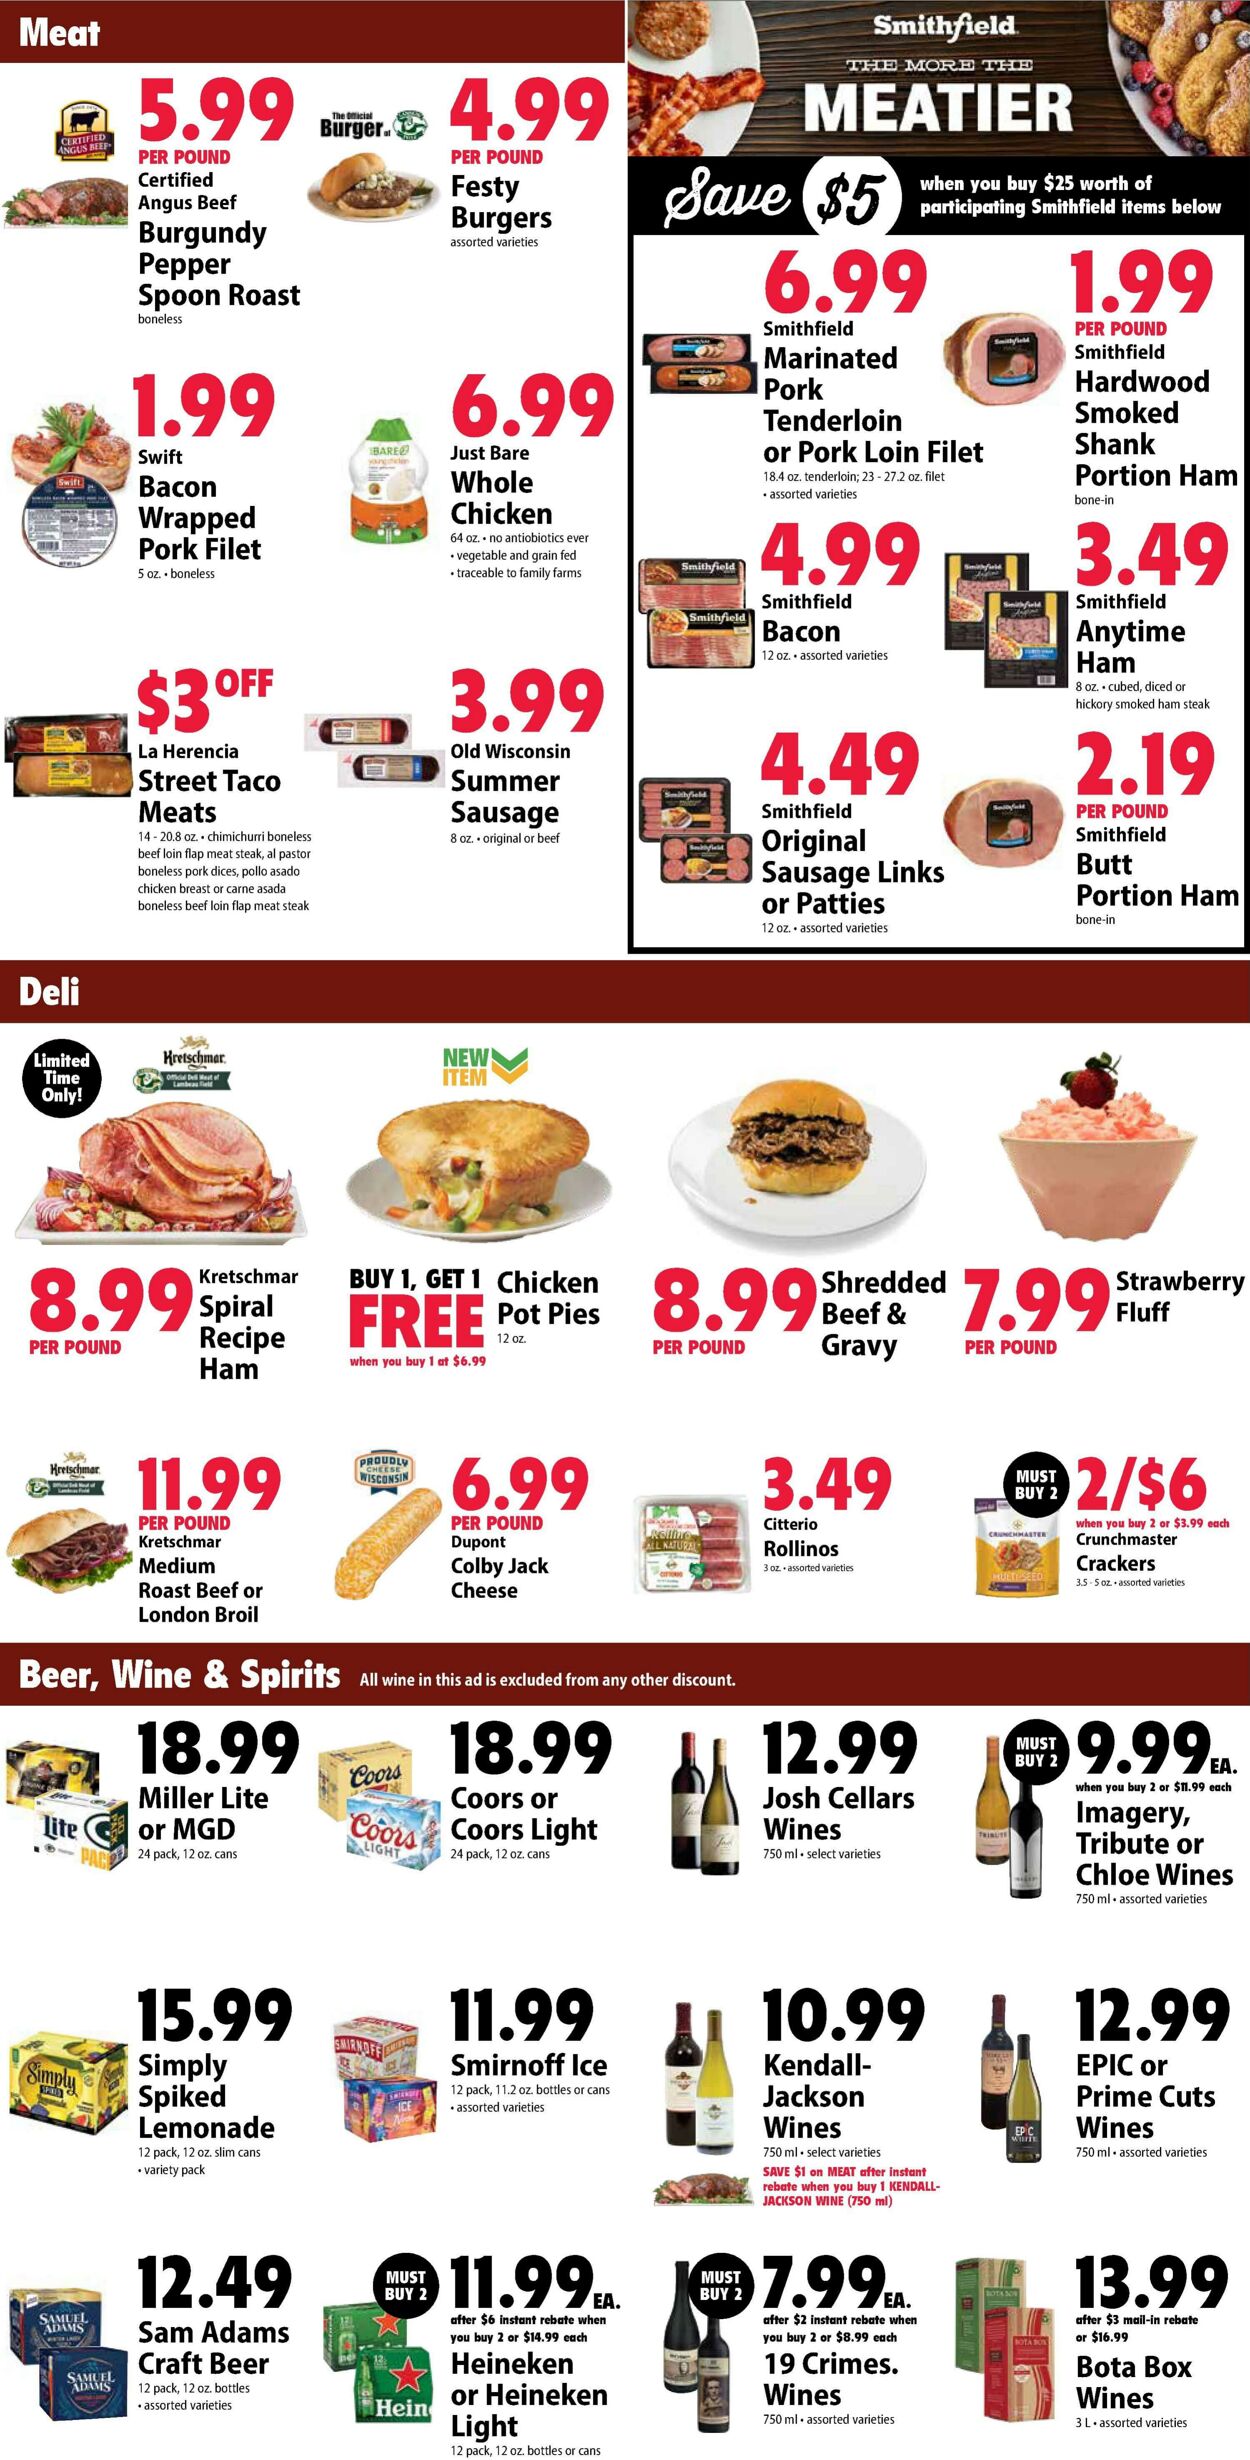 Weekly ad Festival Foods 11/30/2022 - 12/06/2022